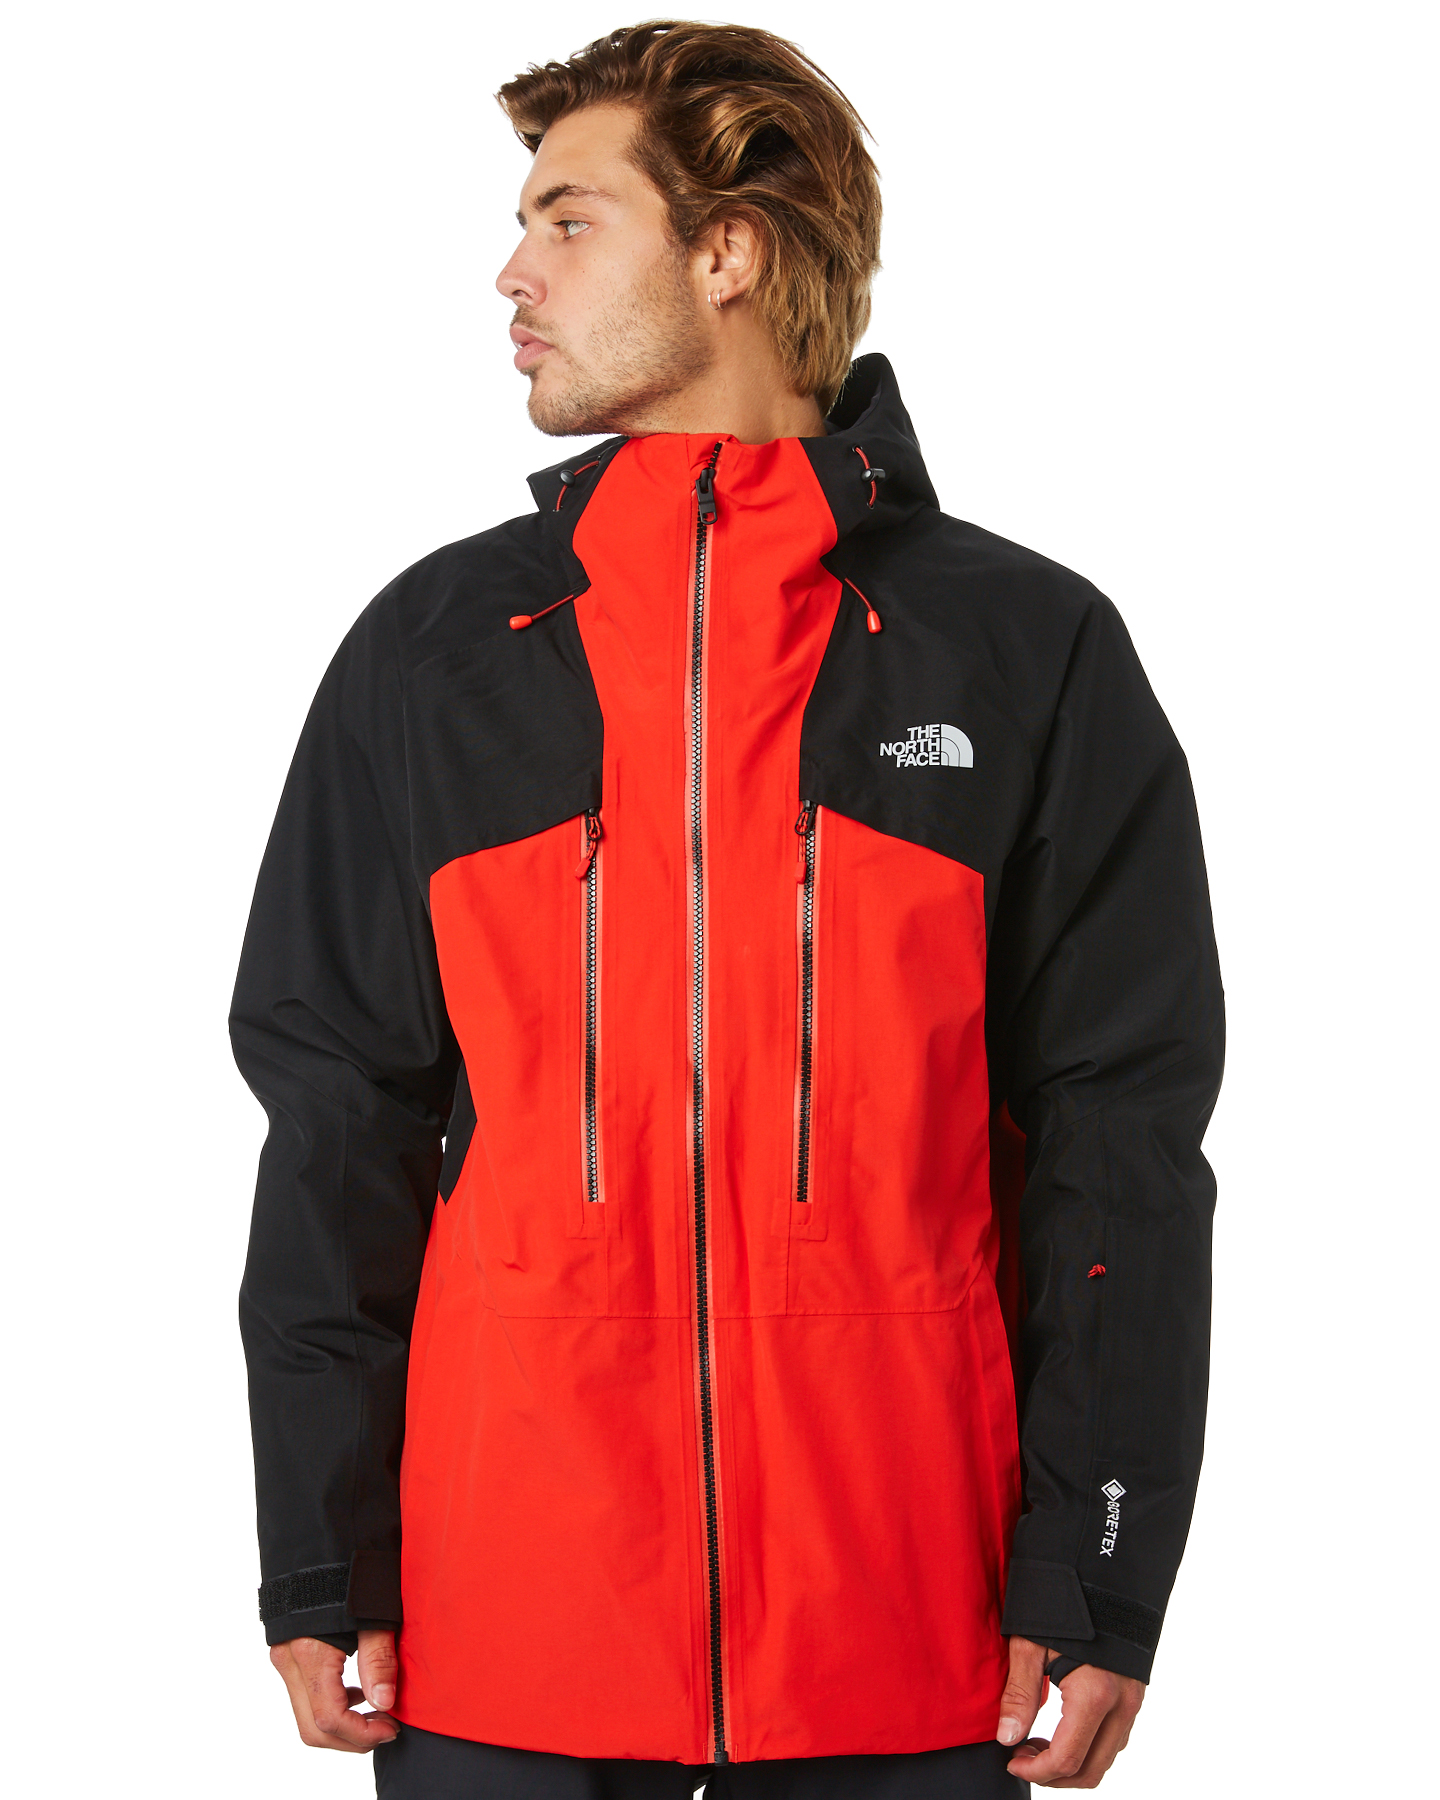 mens black and red north face jacket